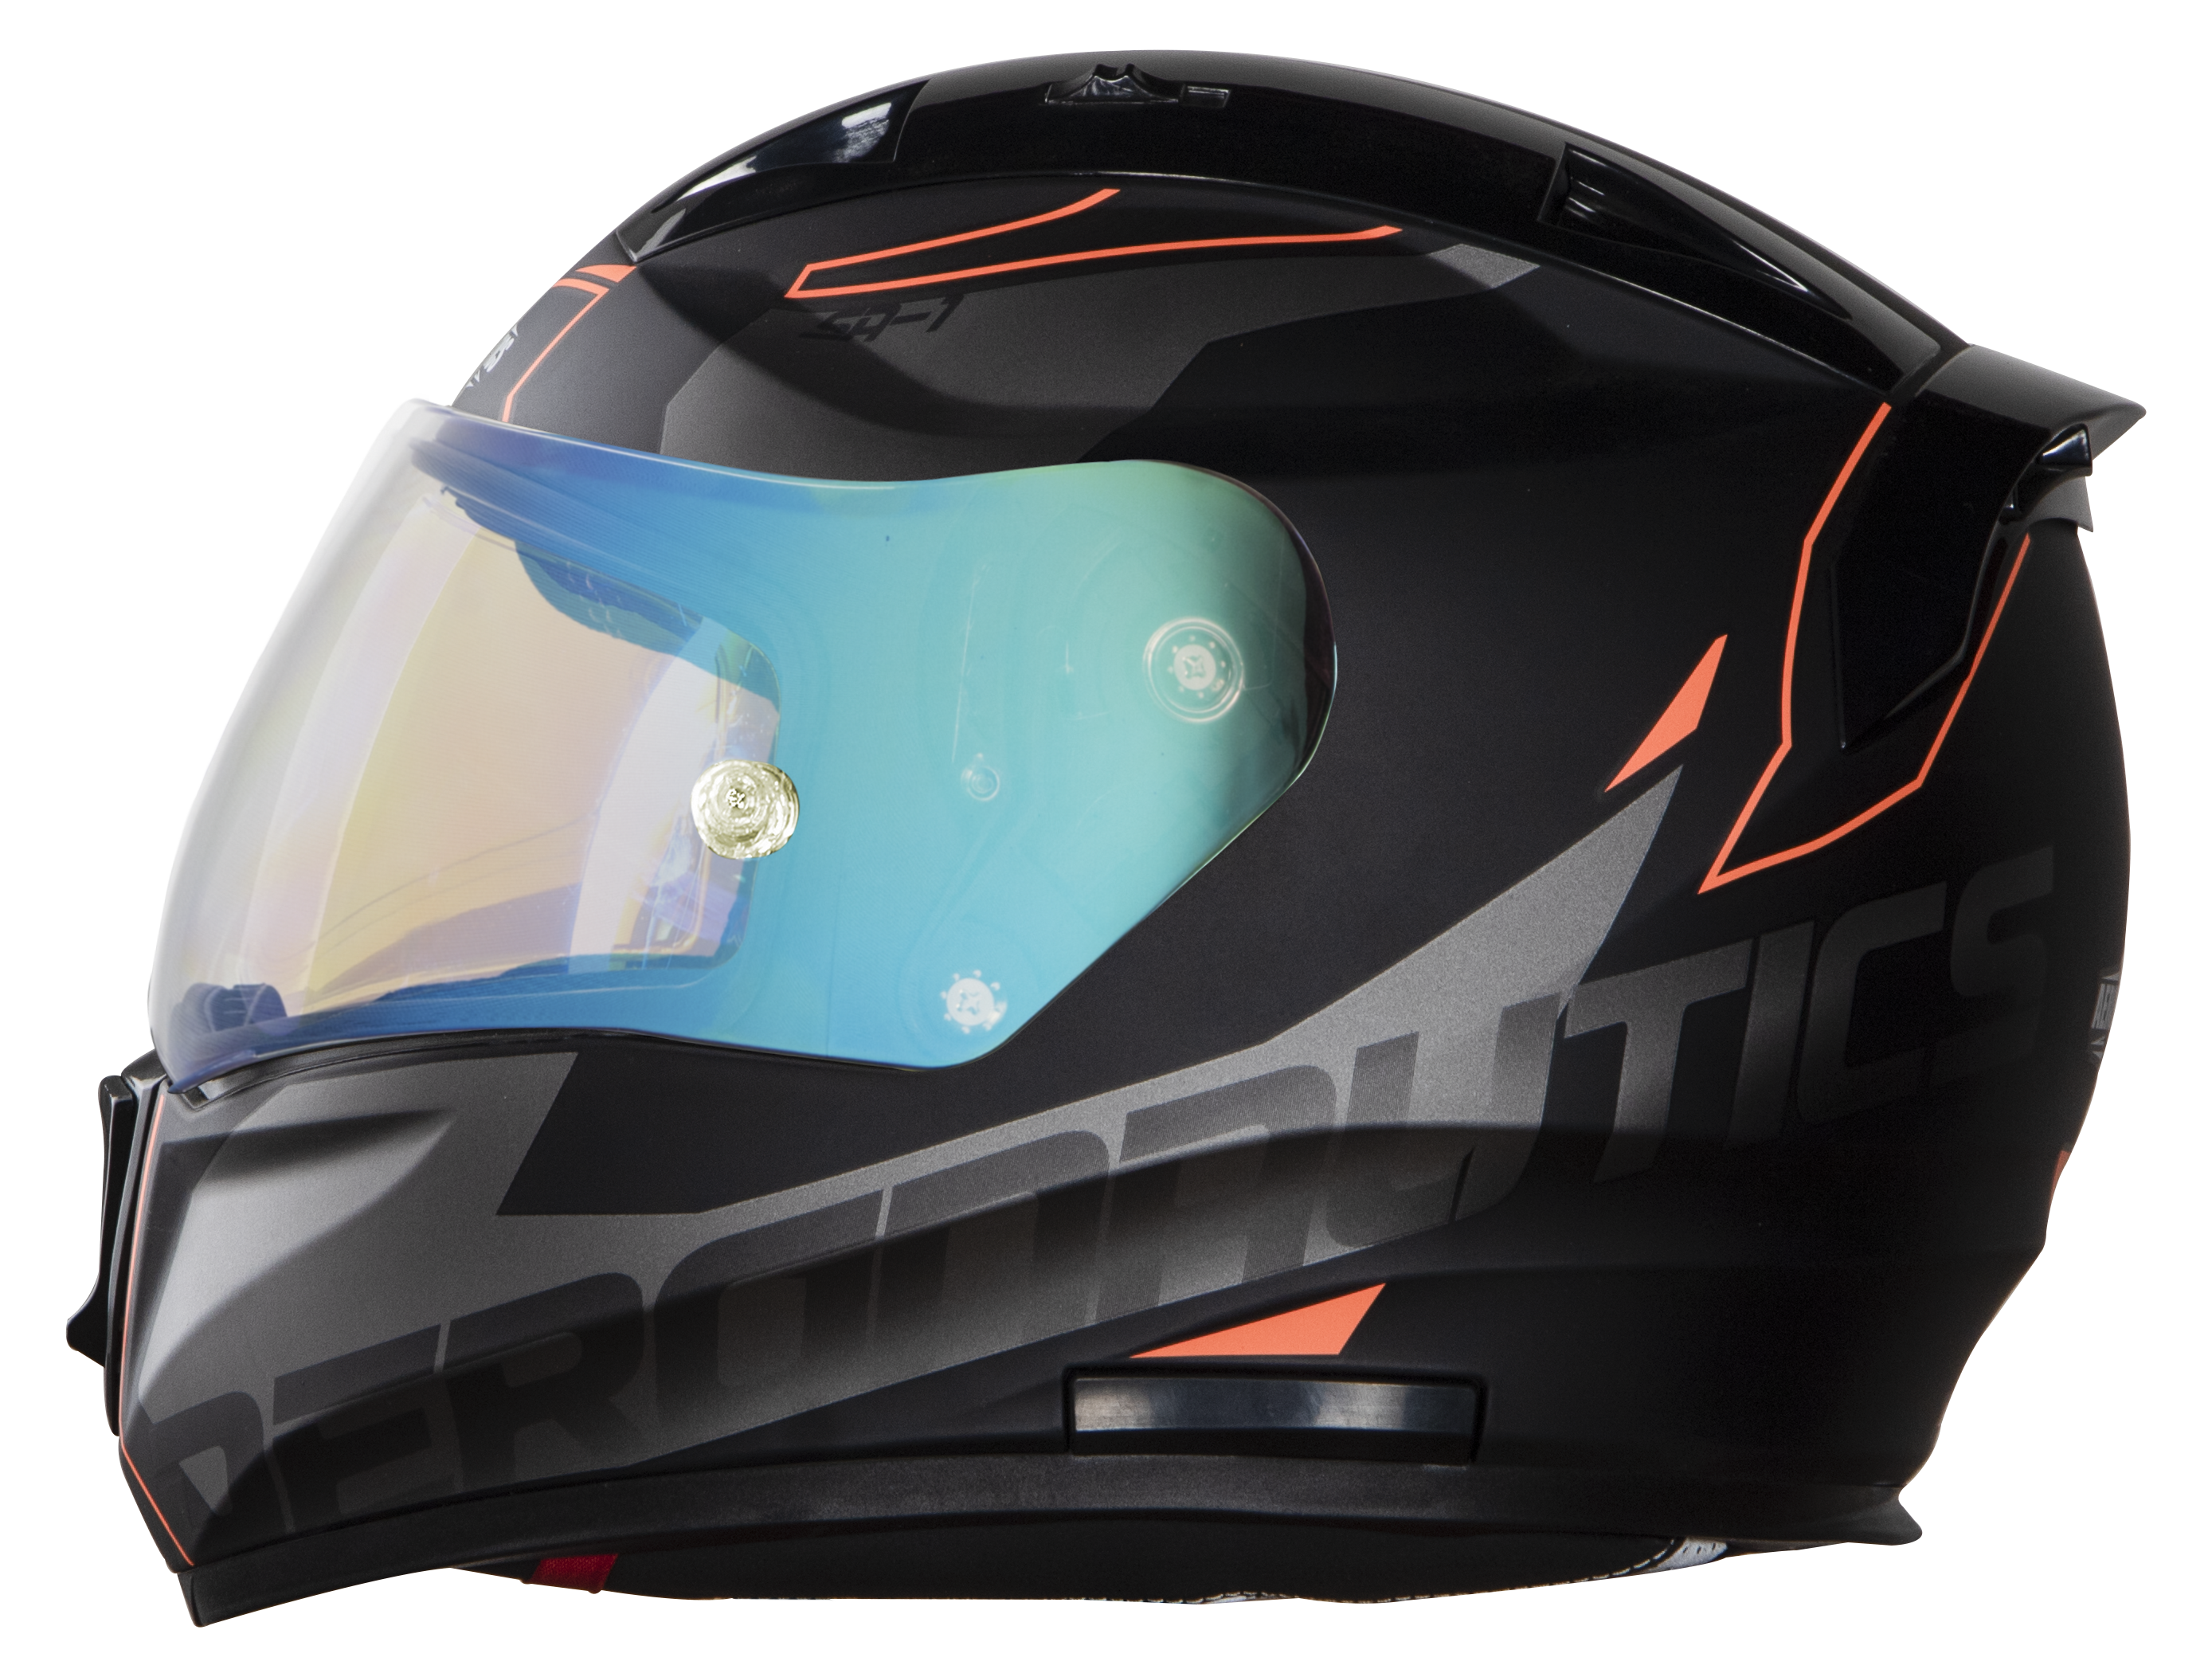 SA-1 RTW Mat Black/Orange With Anti-Fog Shield Blue Night Vision Visor(Fitted With Clear Visor Extra Blue Night Vision Anti-Fog Shield Visor Free)